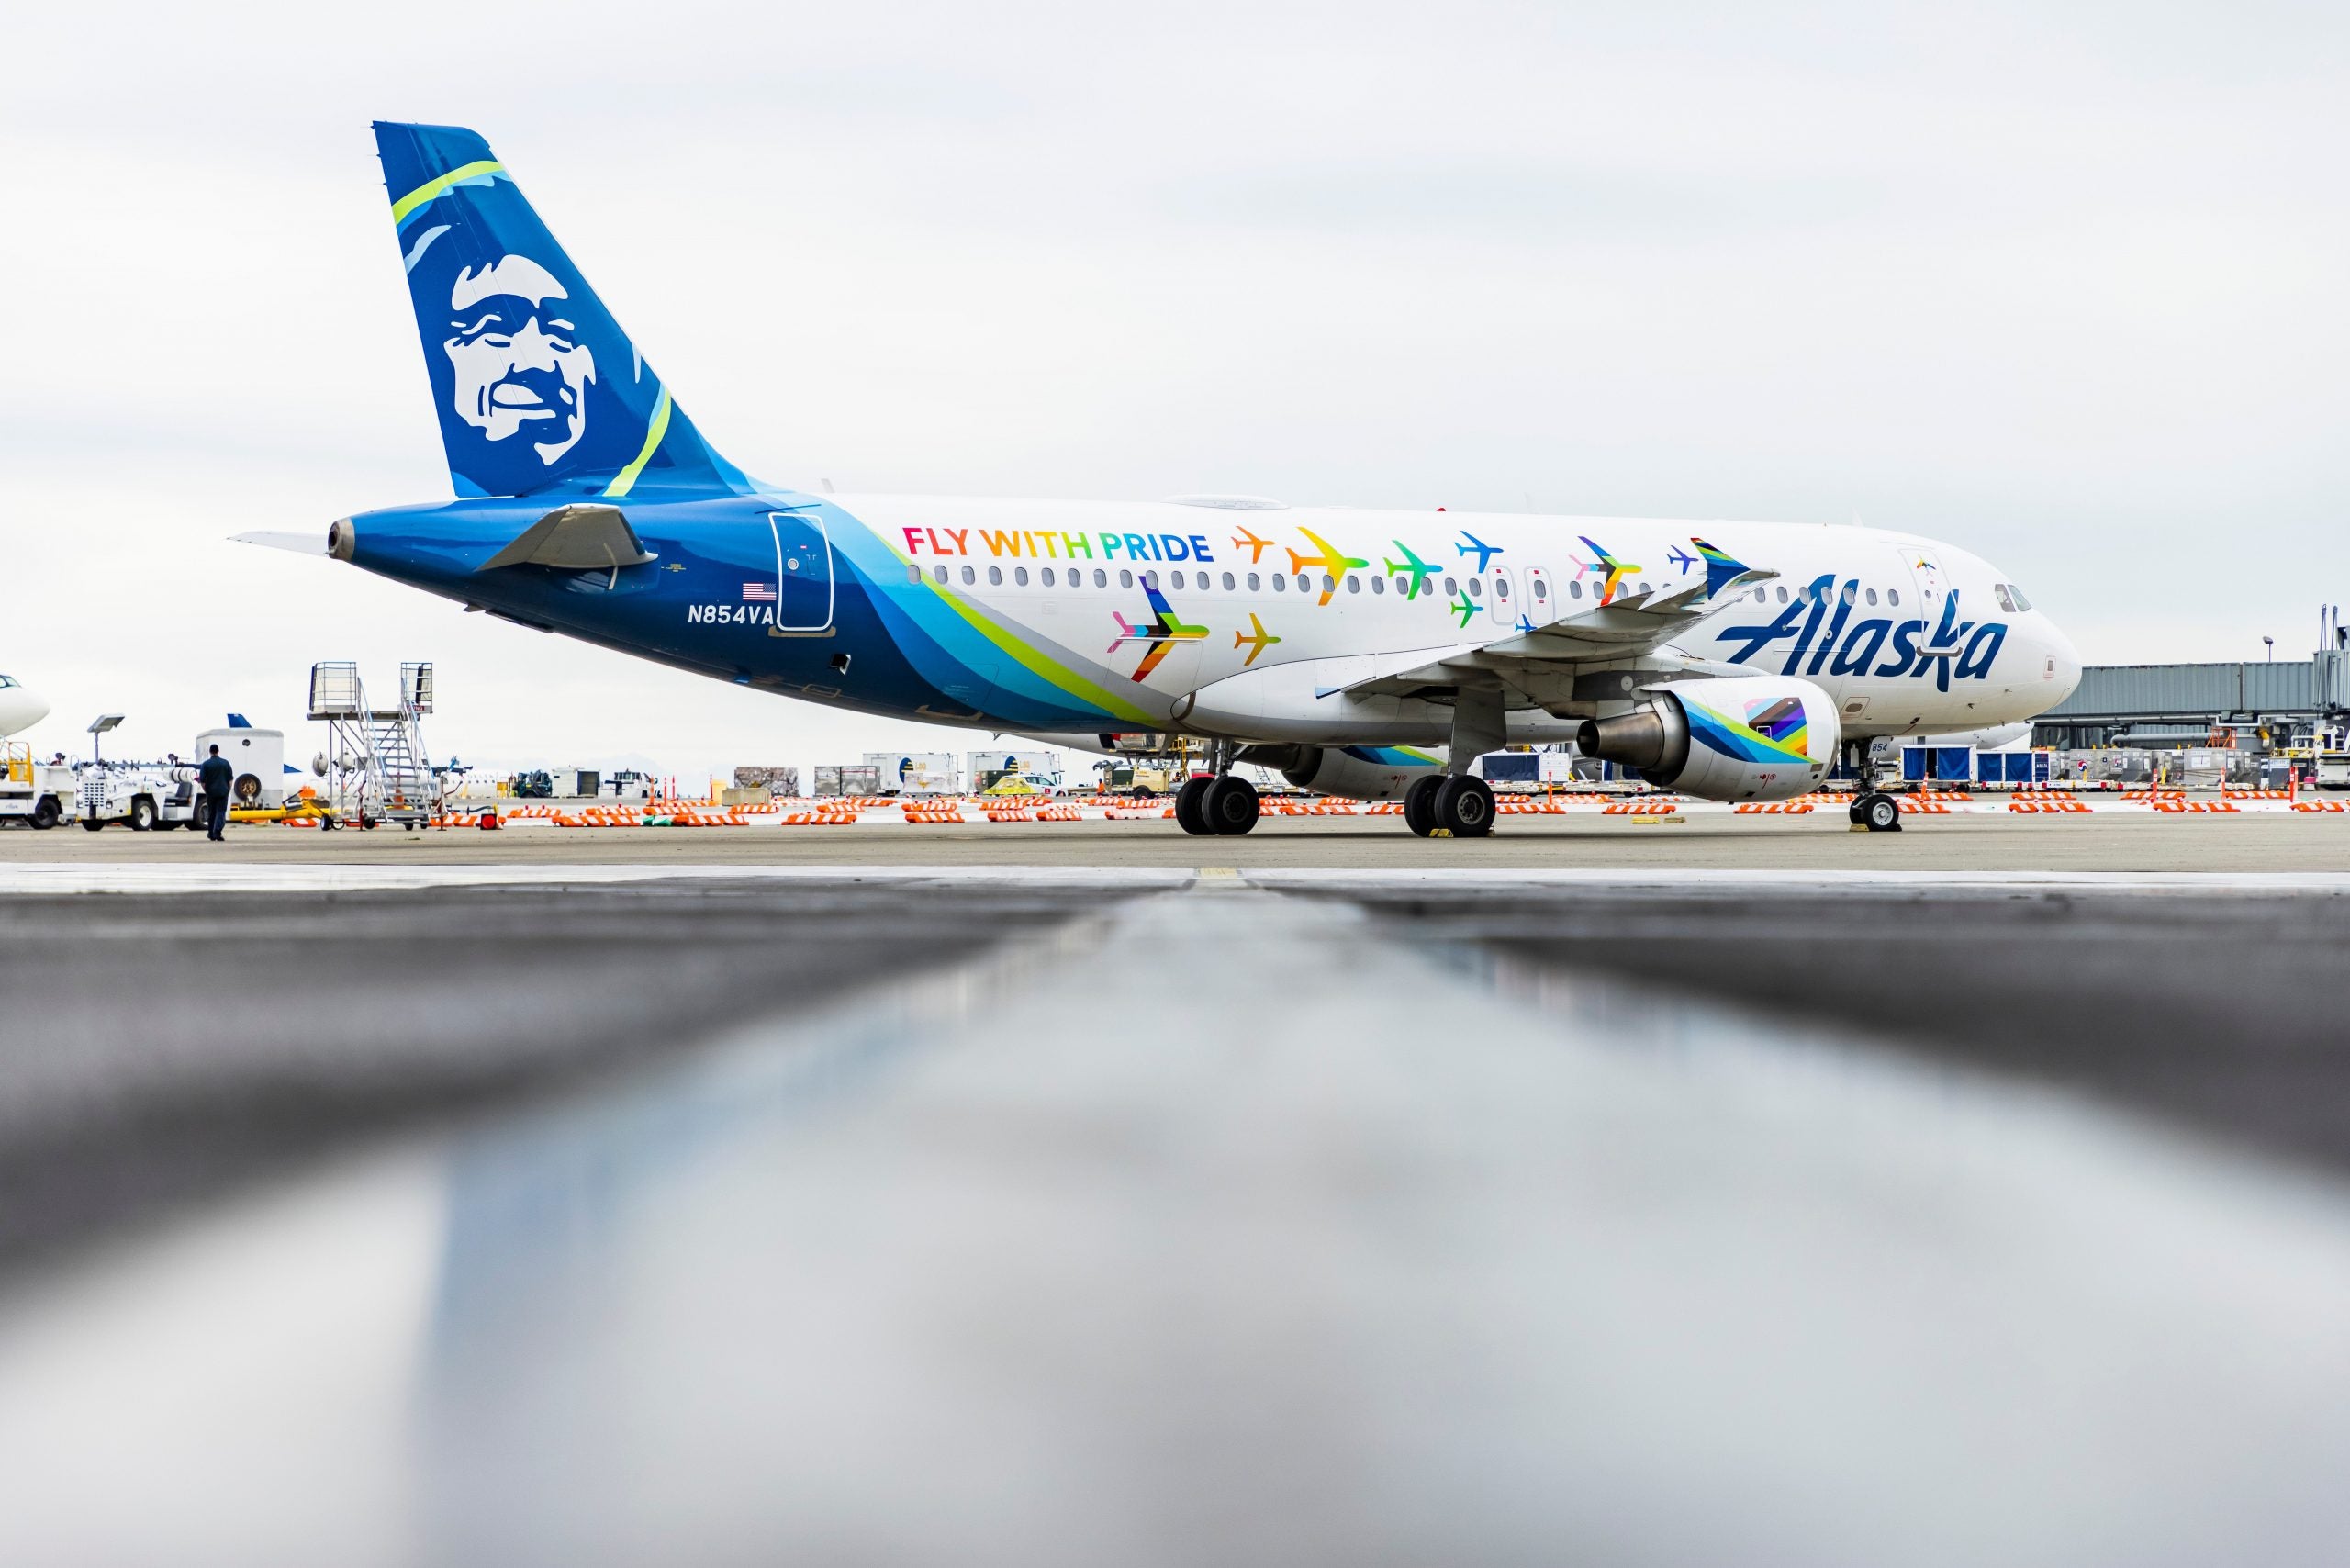 Fly With Pride Alaska Airlines plane.